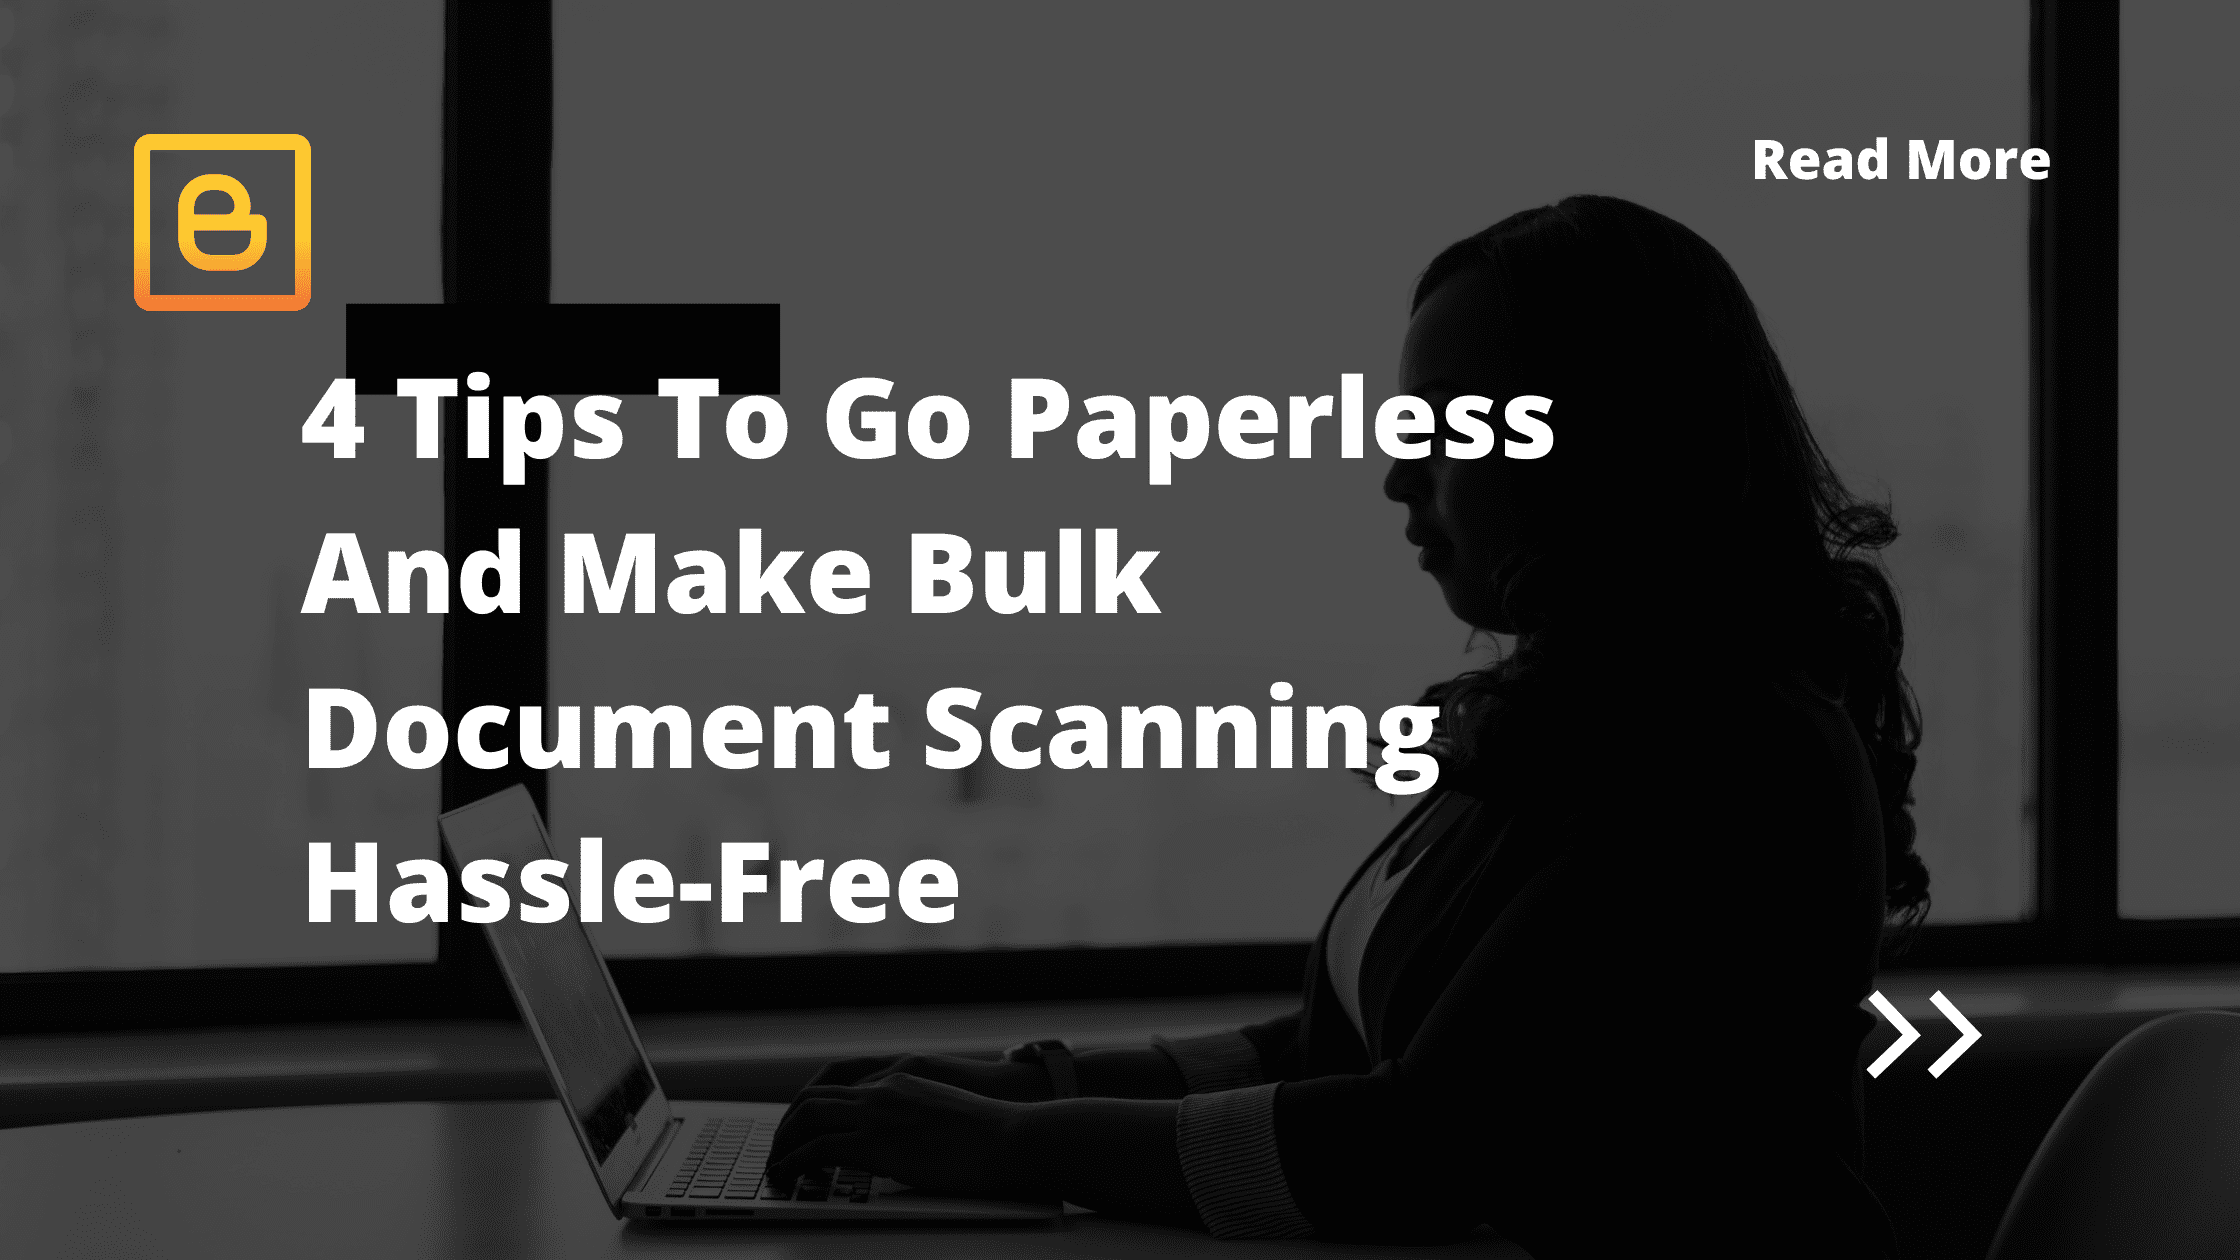 4 Tips To Go Paperless And Make Bulk Document Scanning Hassle-Free